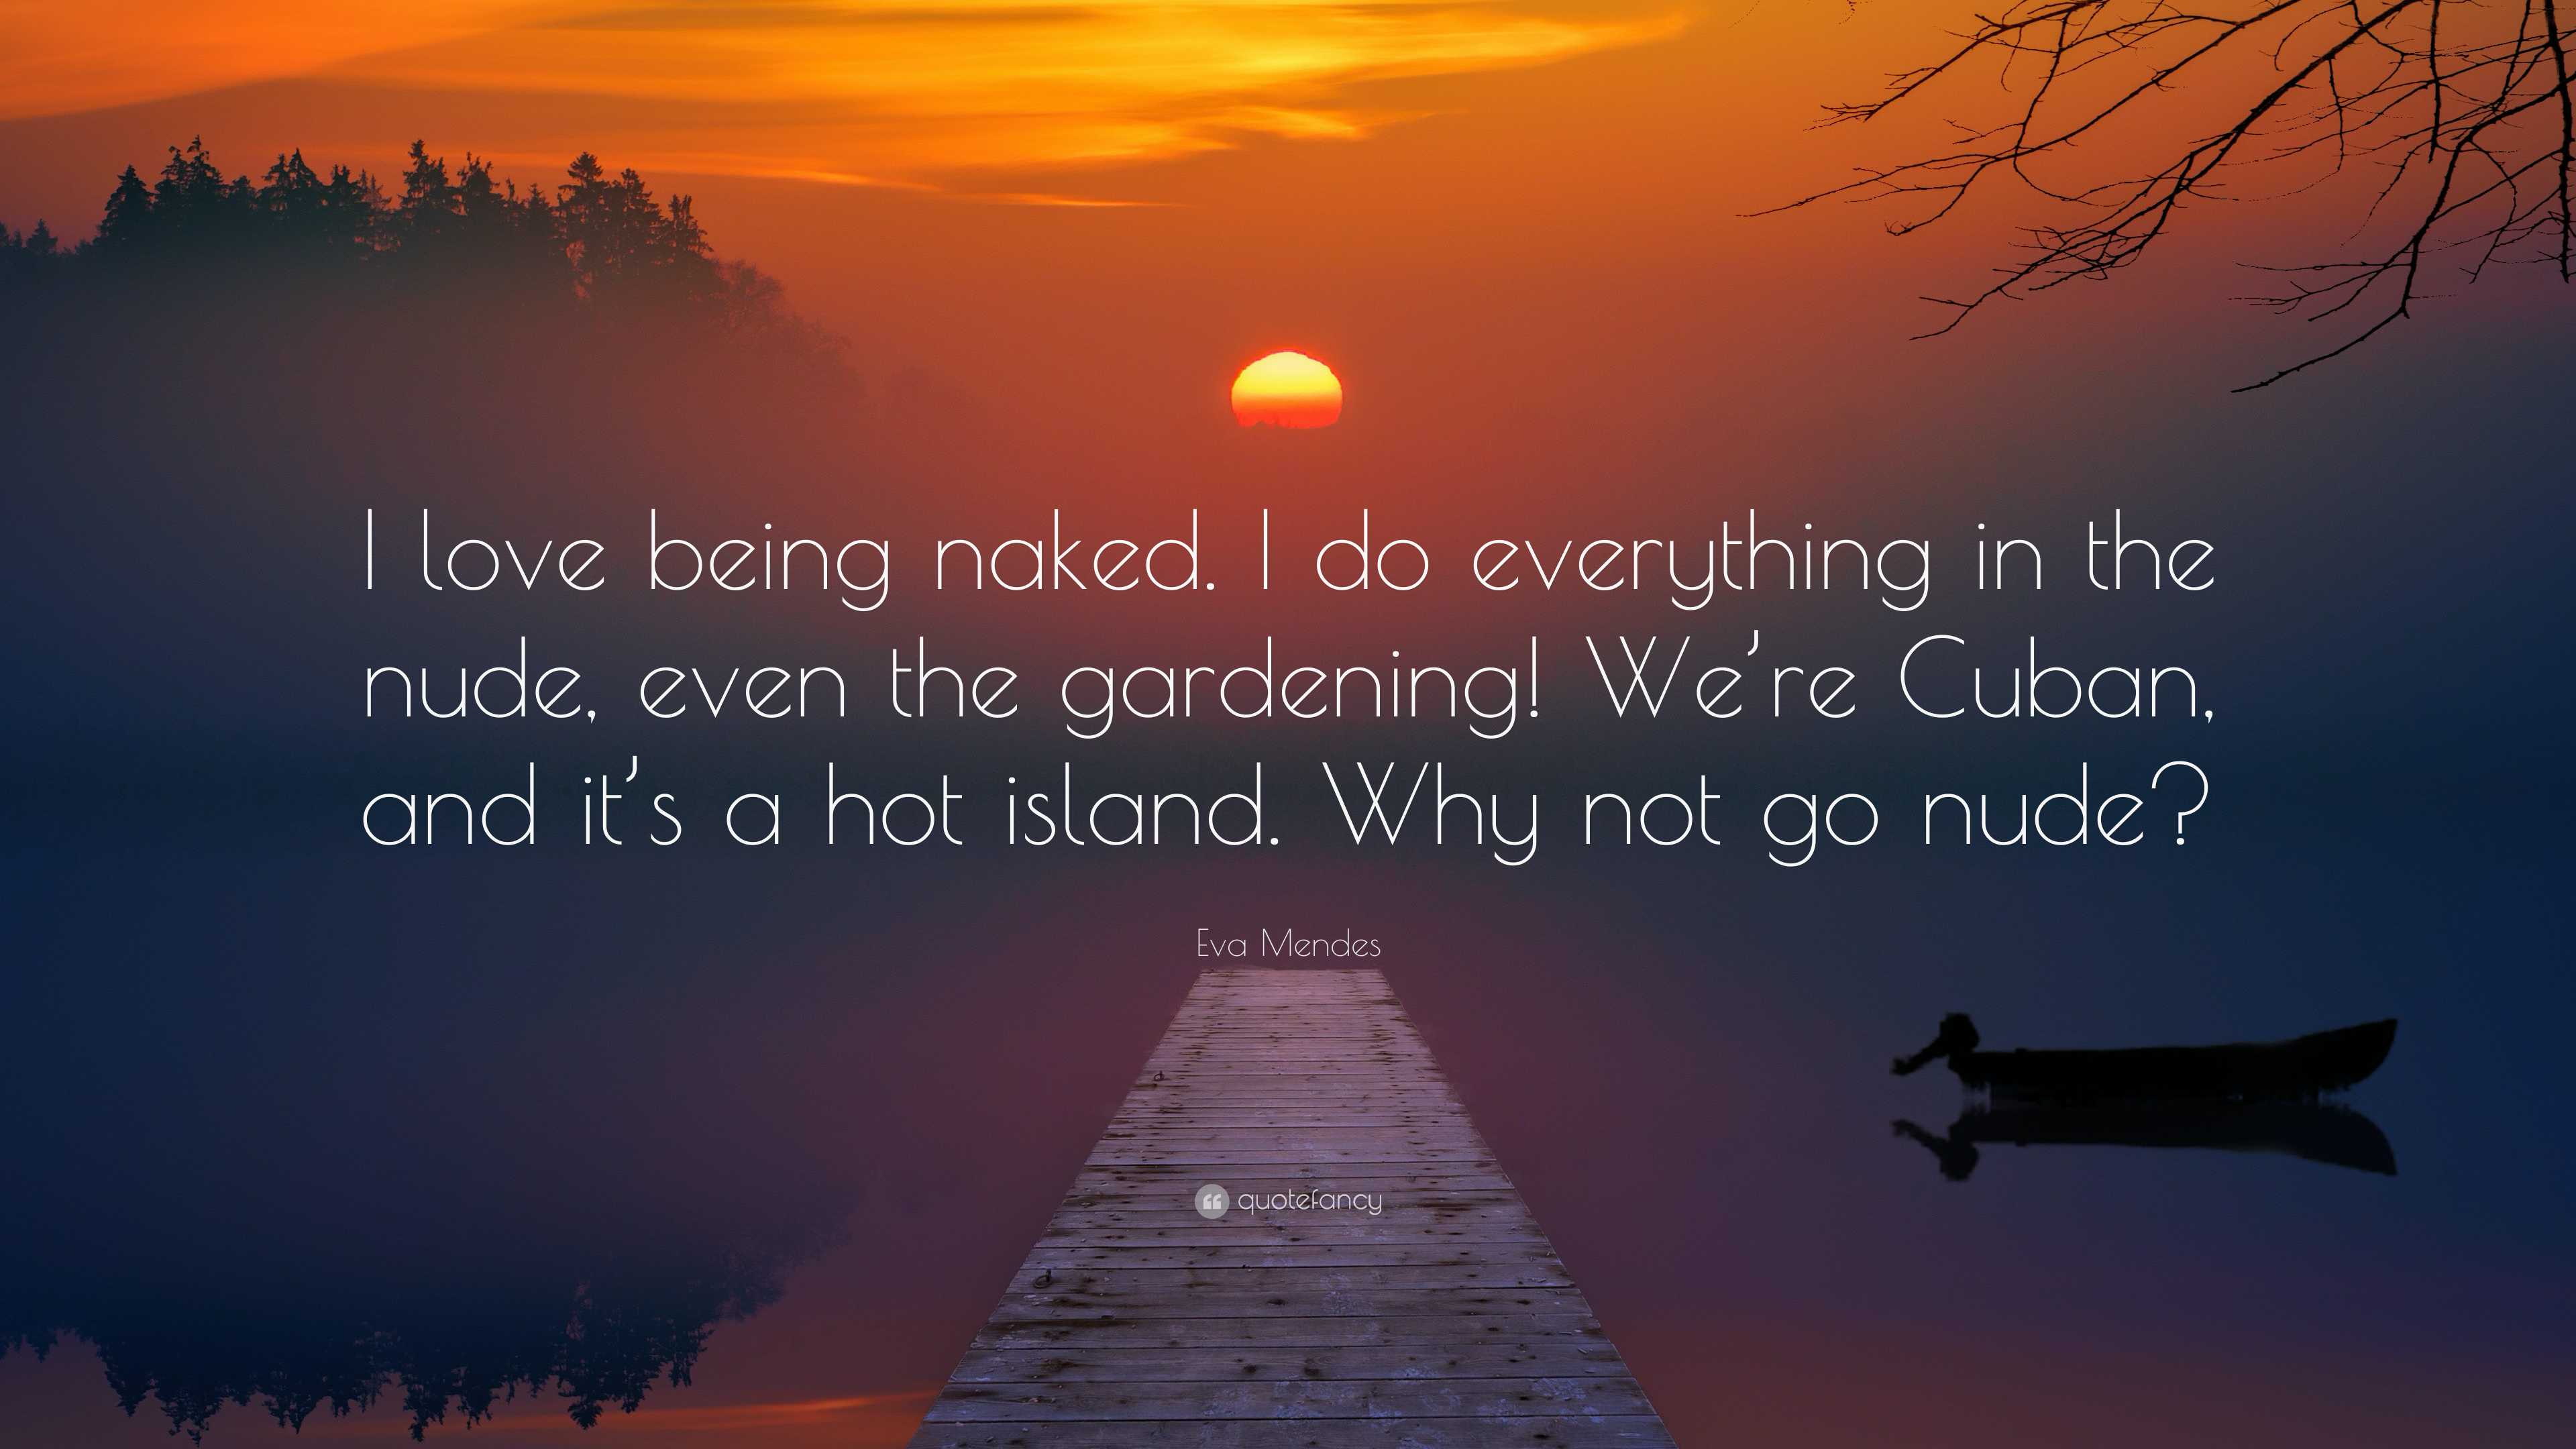 Eva Mendes Quote “i Love Being Naked I Do Everything In The Nude Even The Gardening We Re